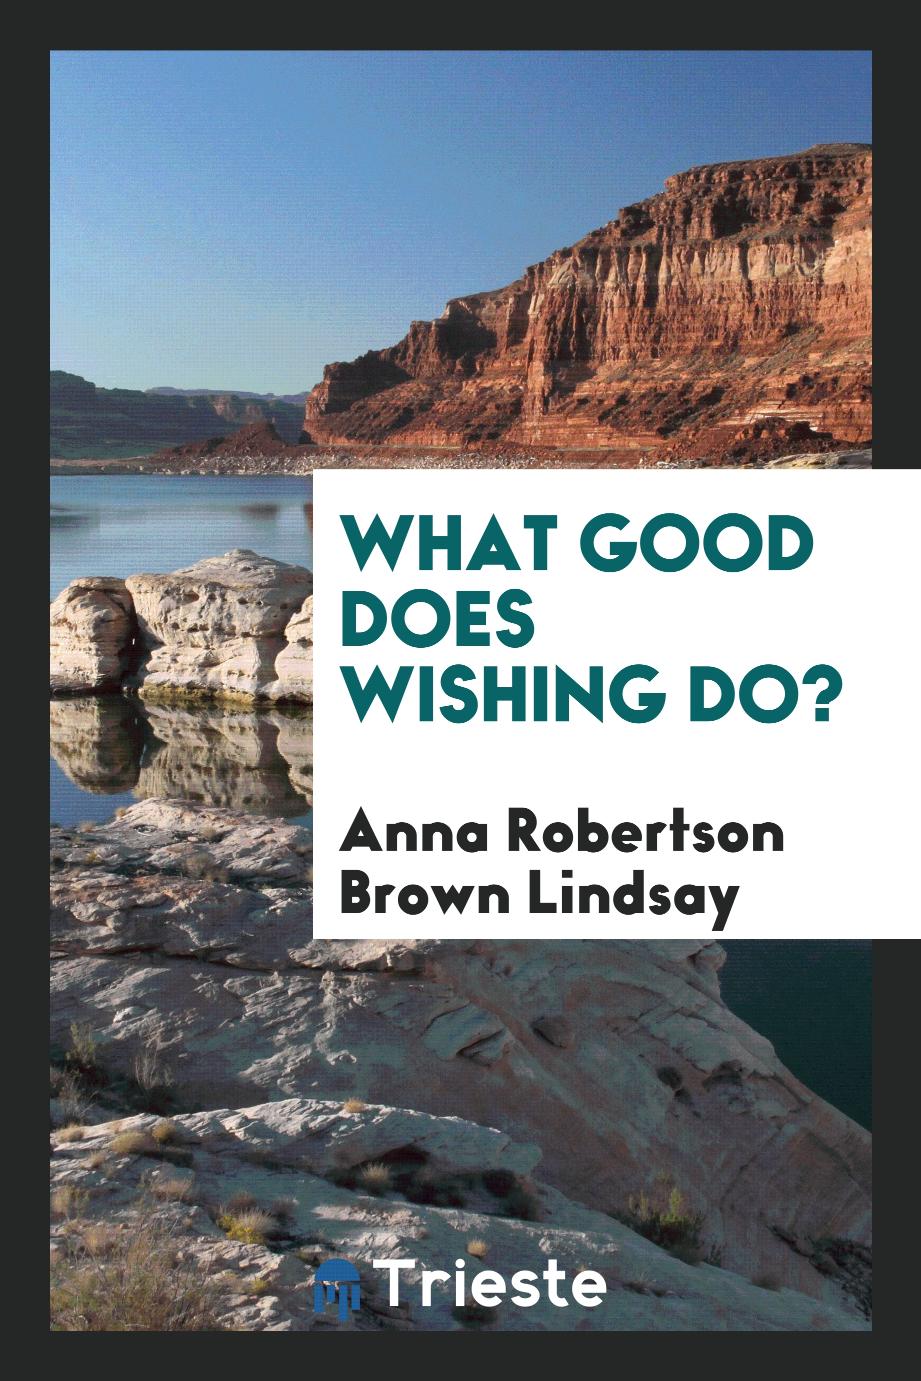 What good does wishing do?